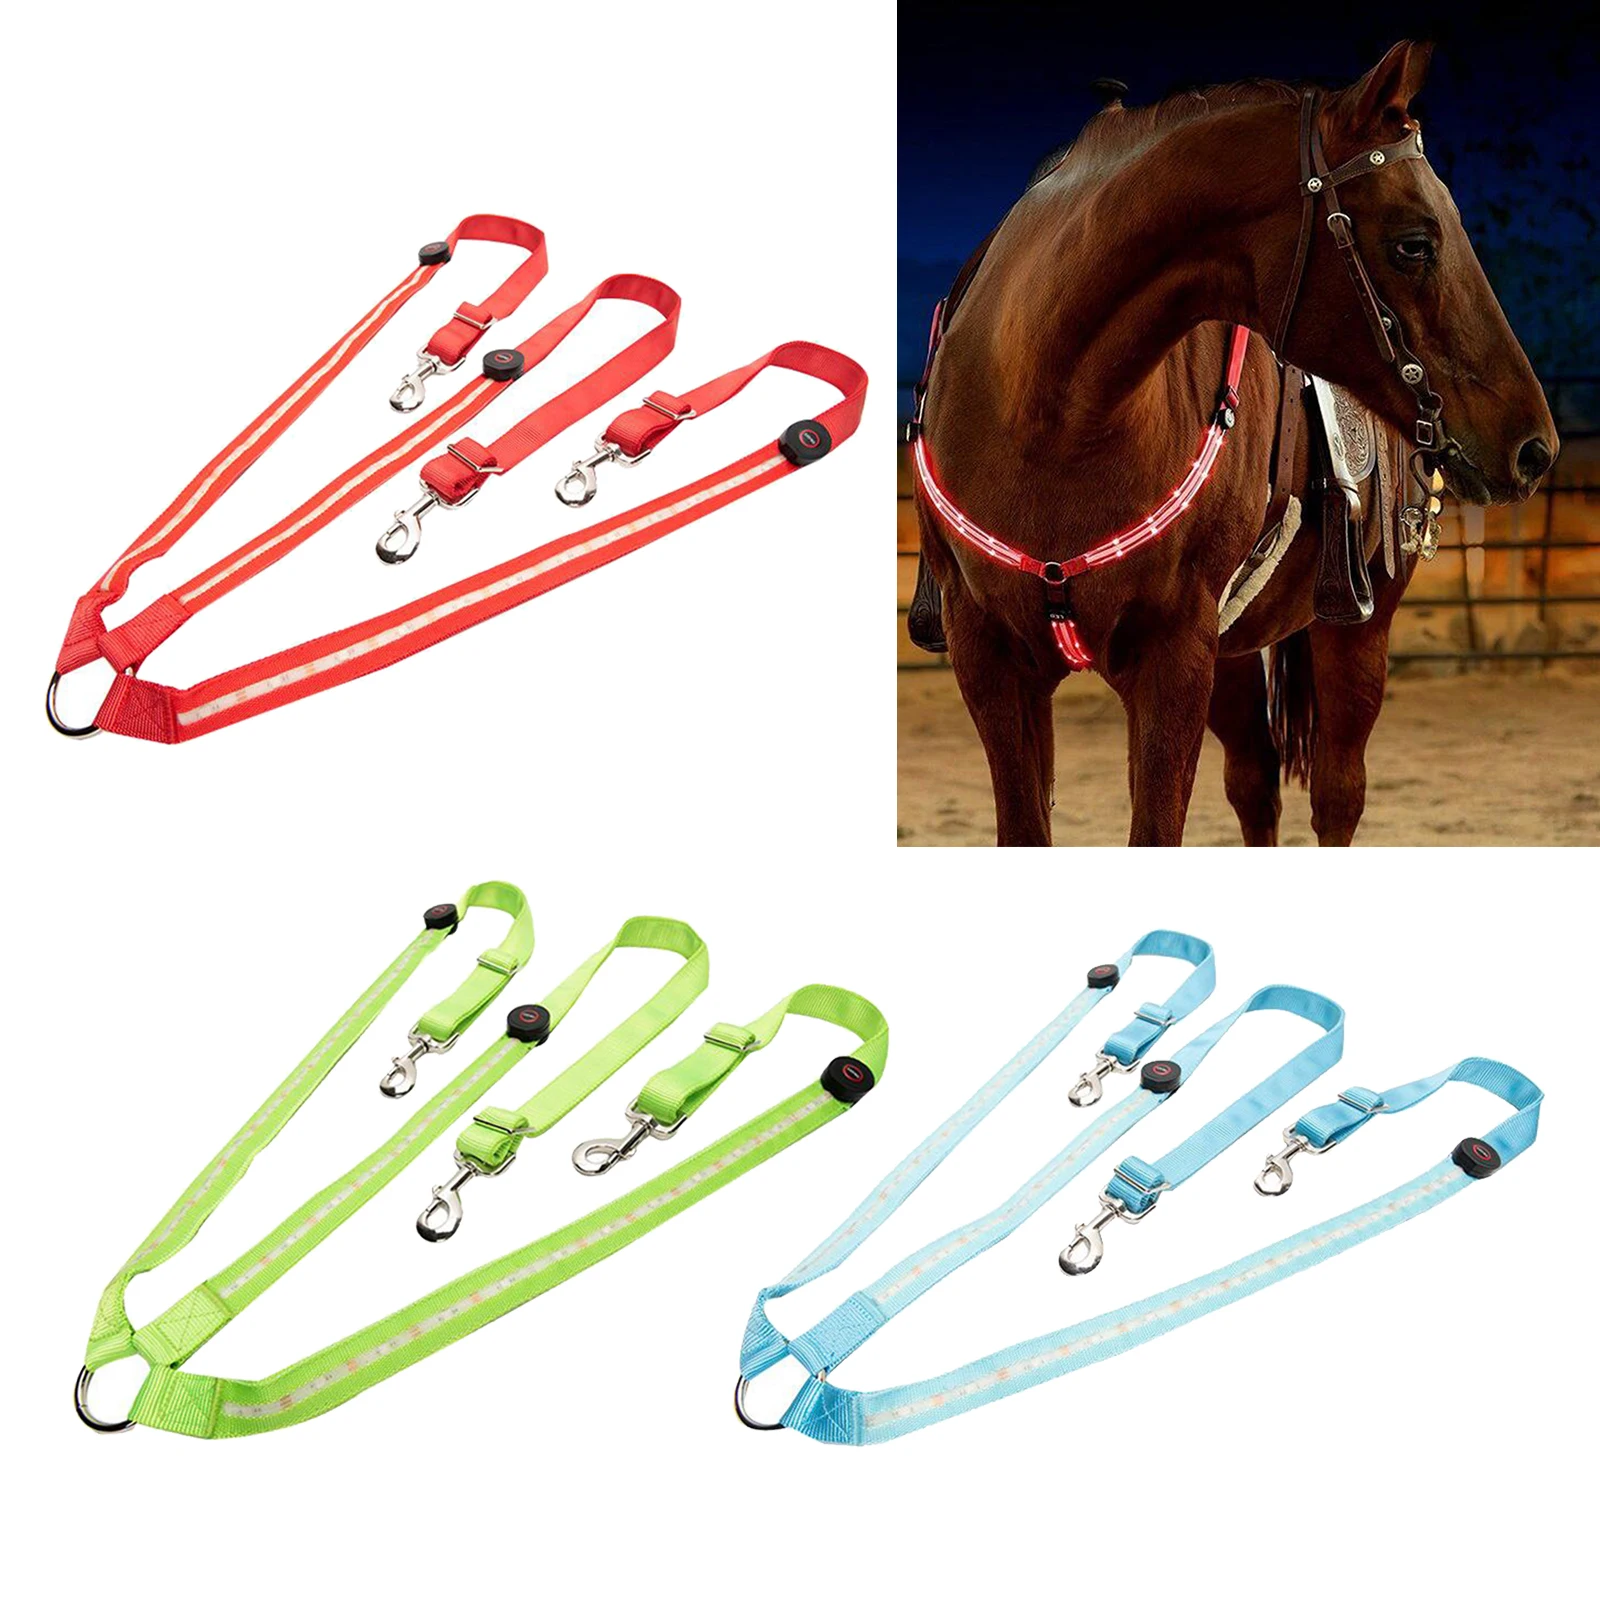 LED Light Horse Breastplate Collar Adjustable Visibility Tack Equestrian Safety